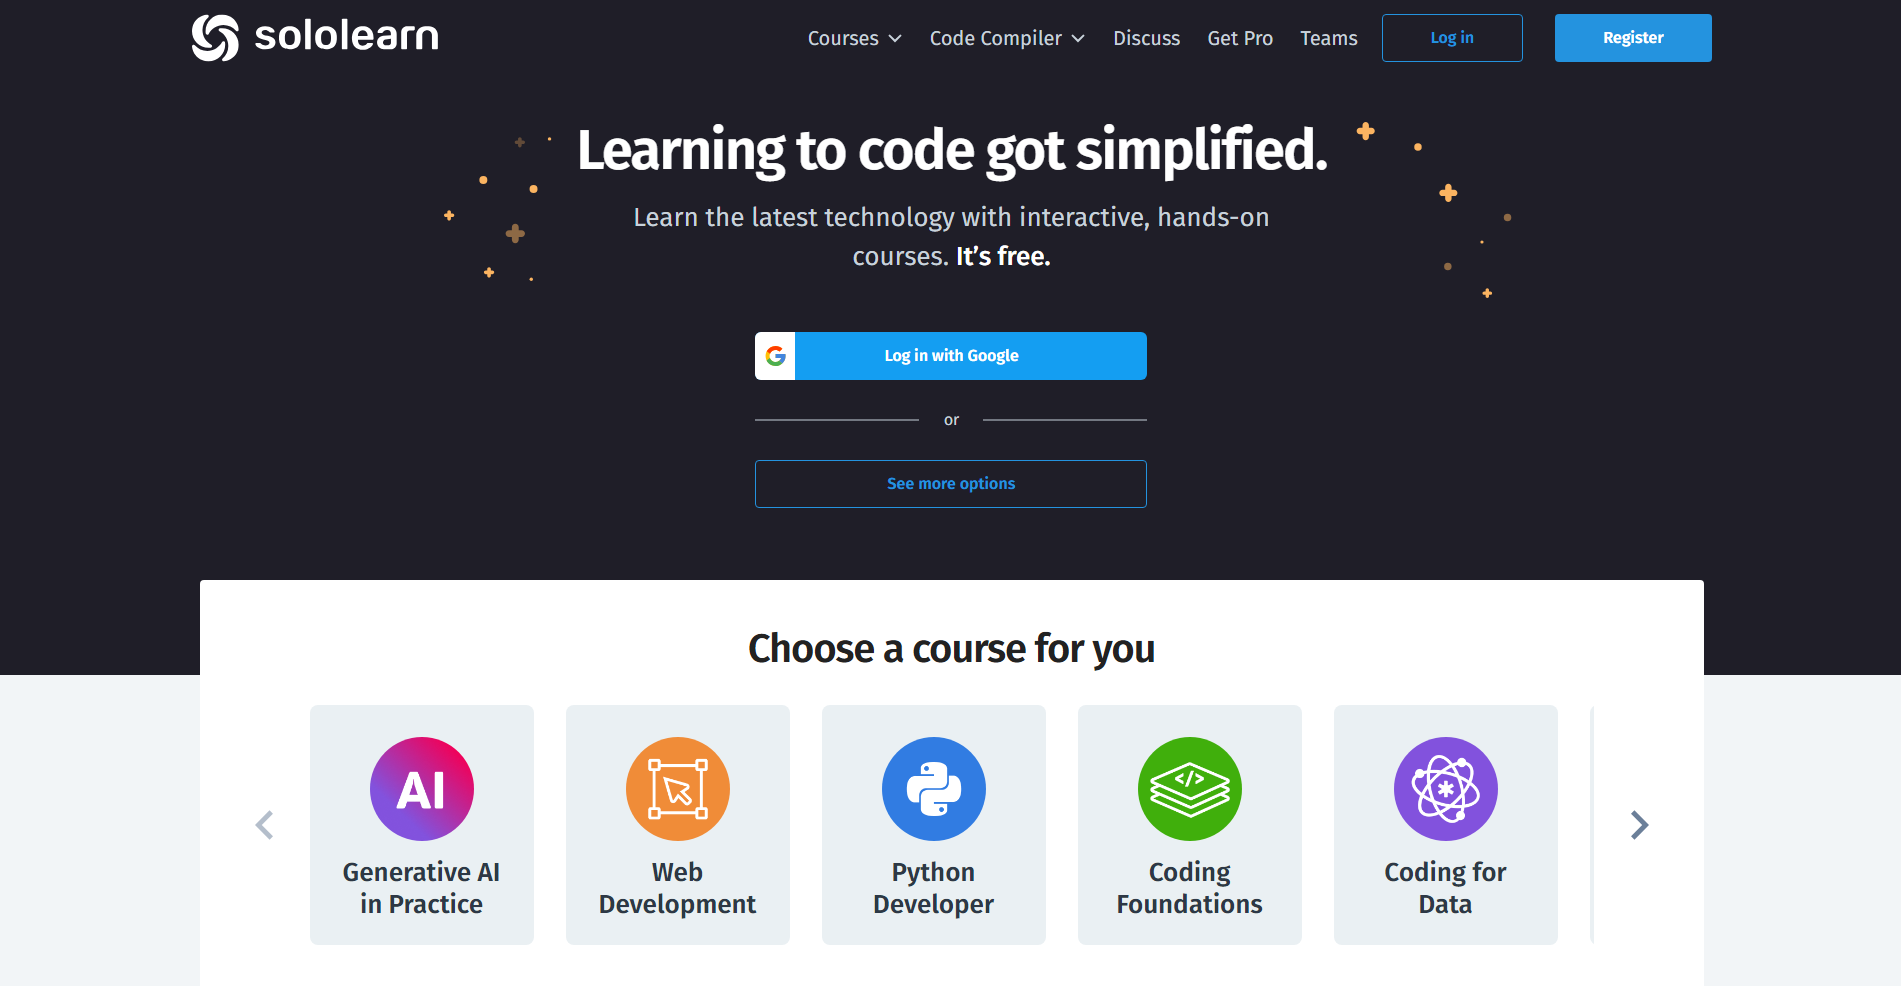 SoloLearn: Programming blog and website